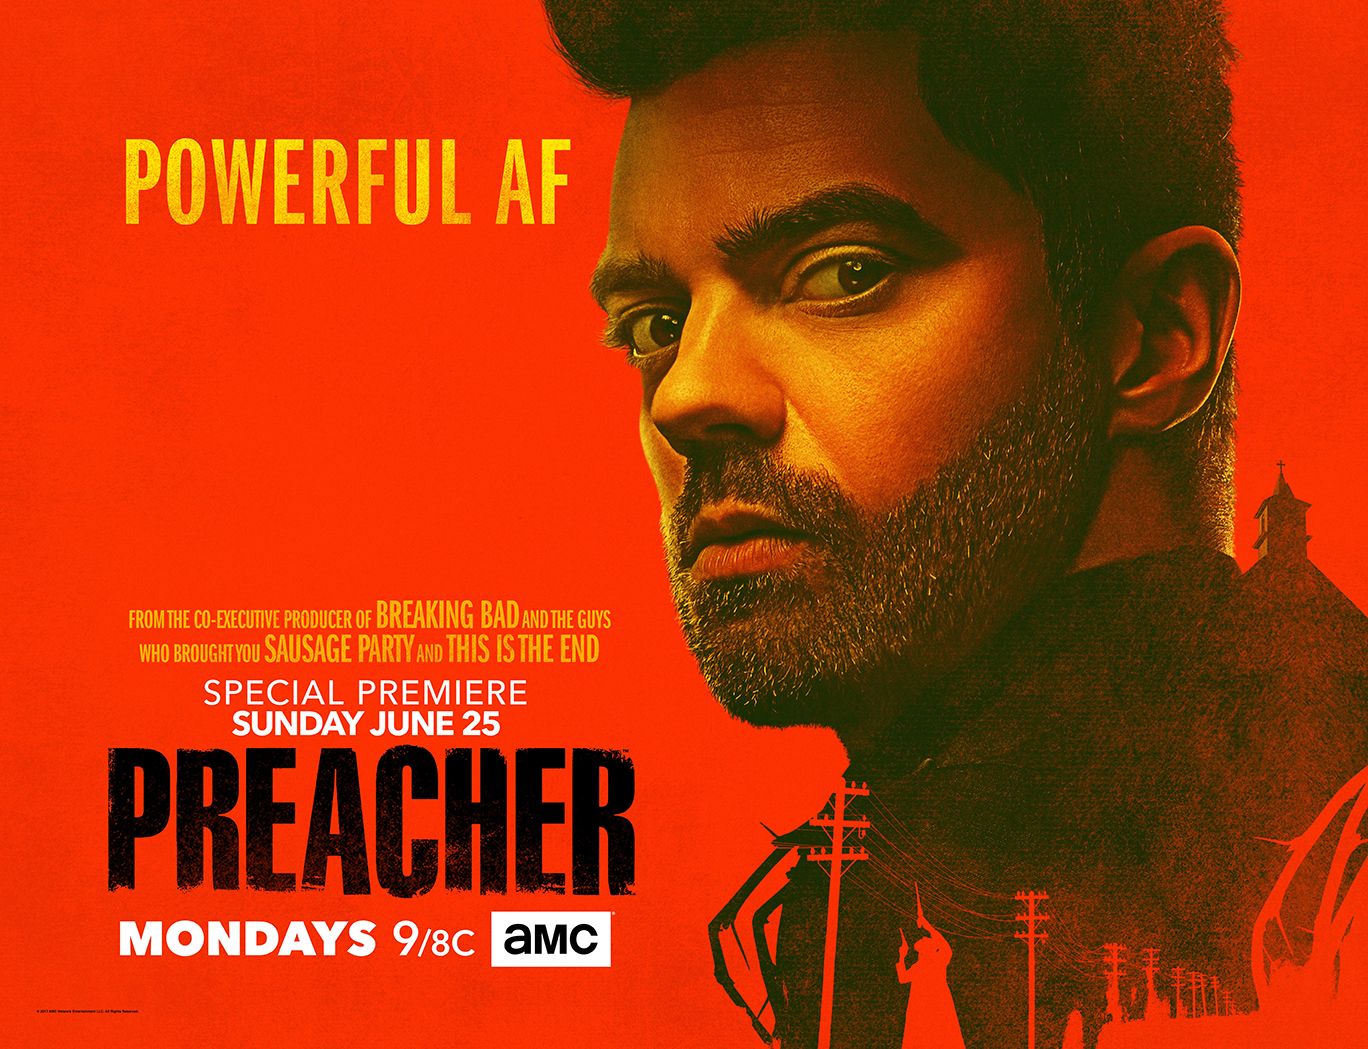 Preacher Releases New Art Images in Anticipation of Season Two!